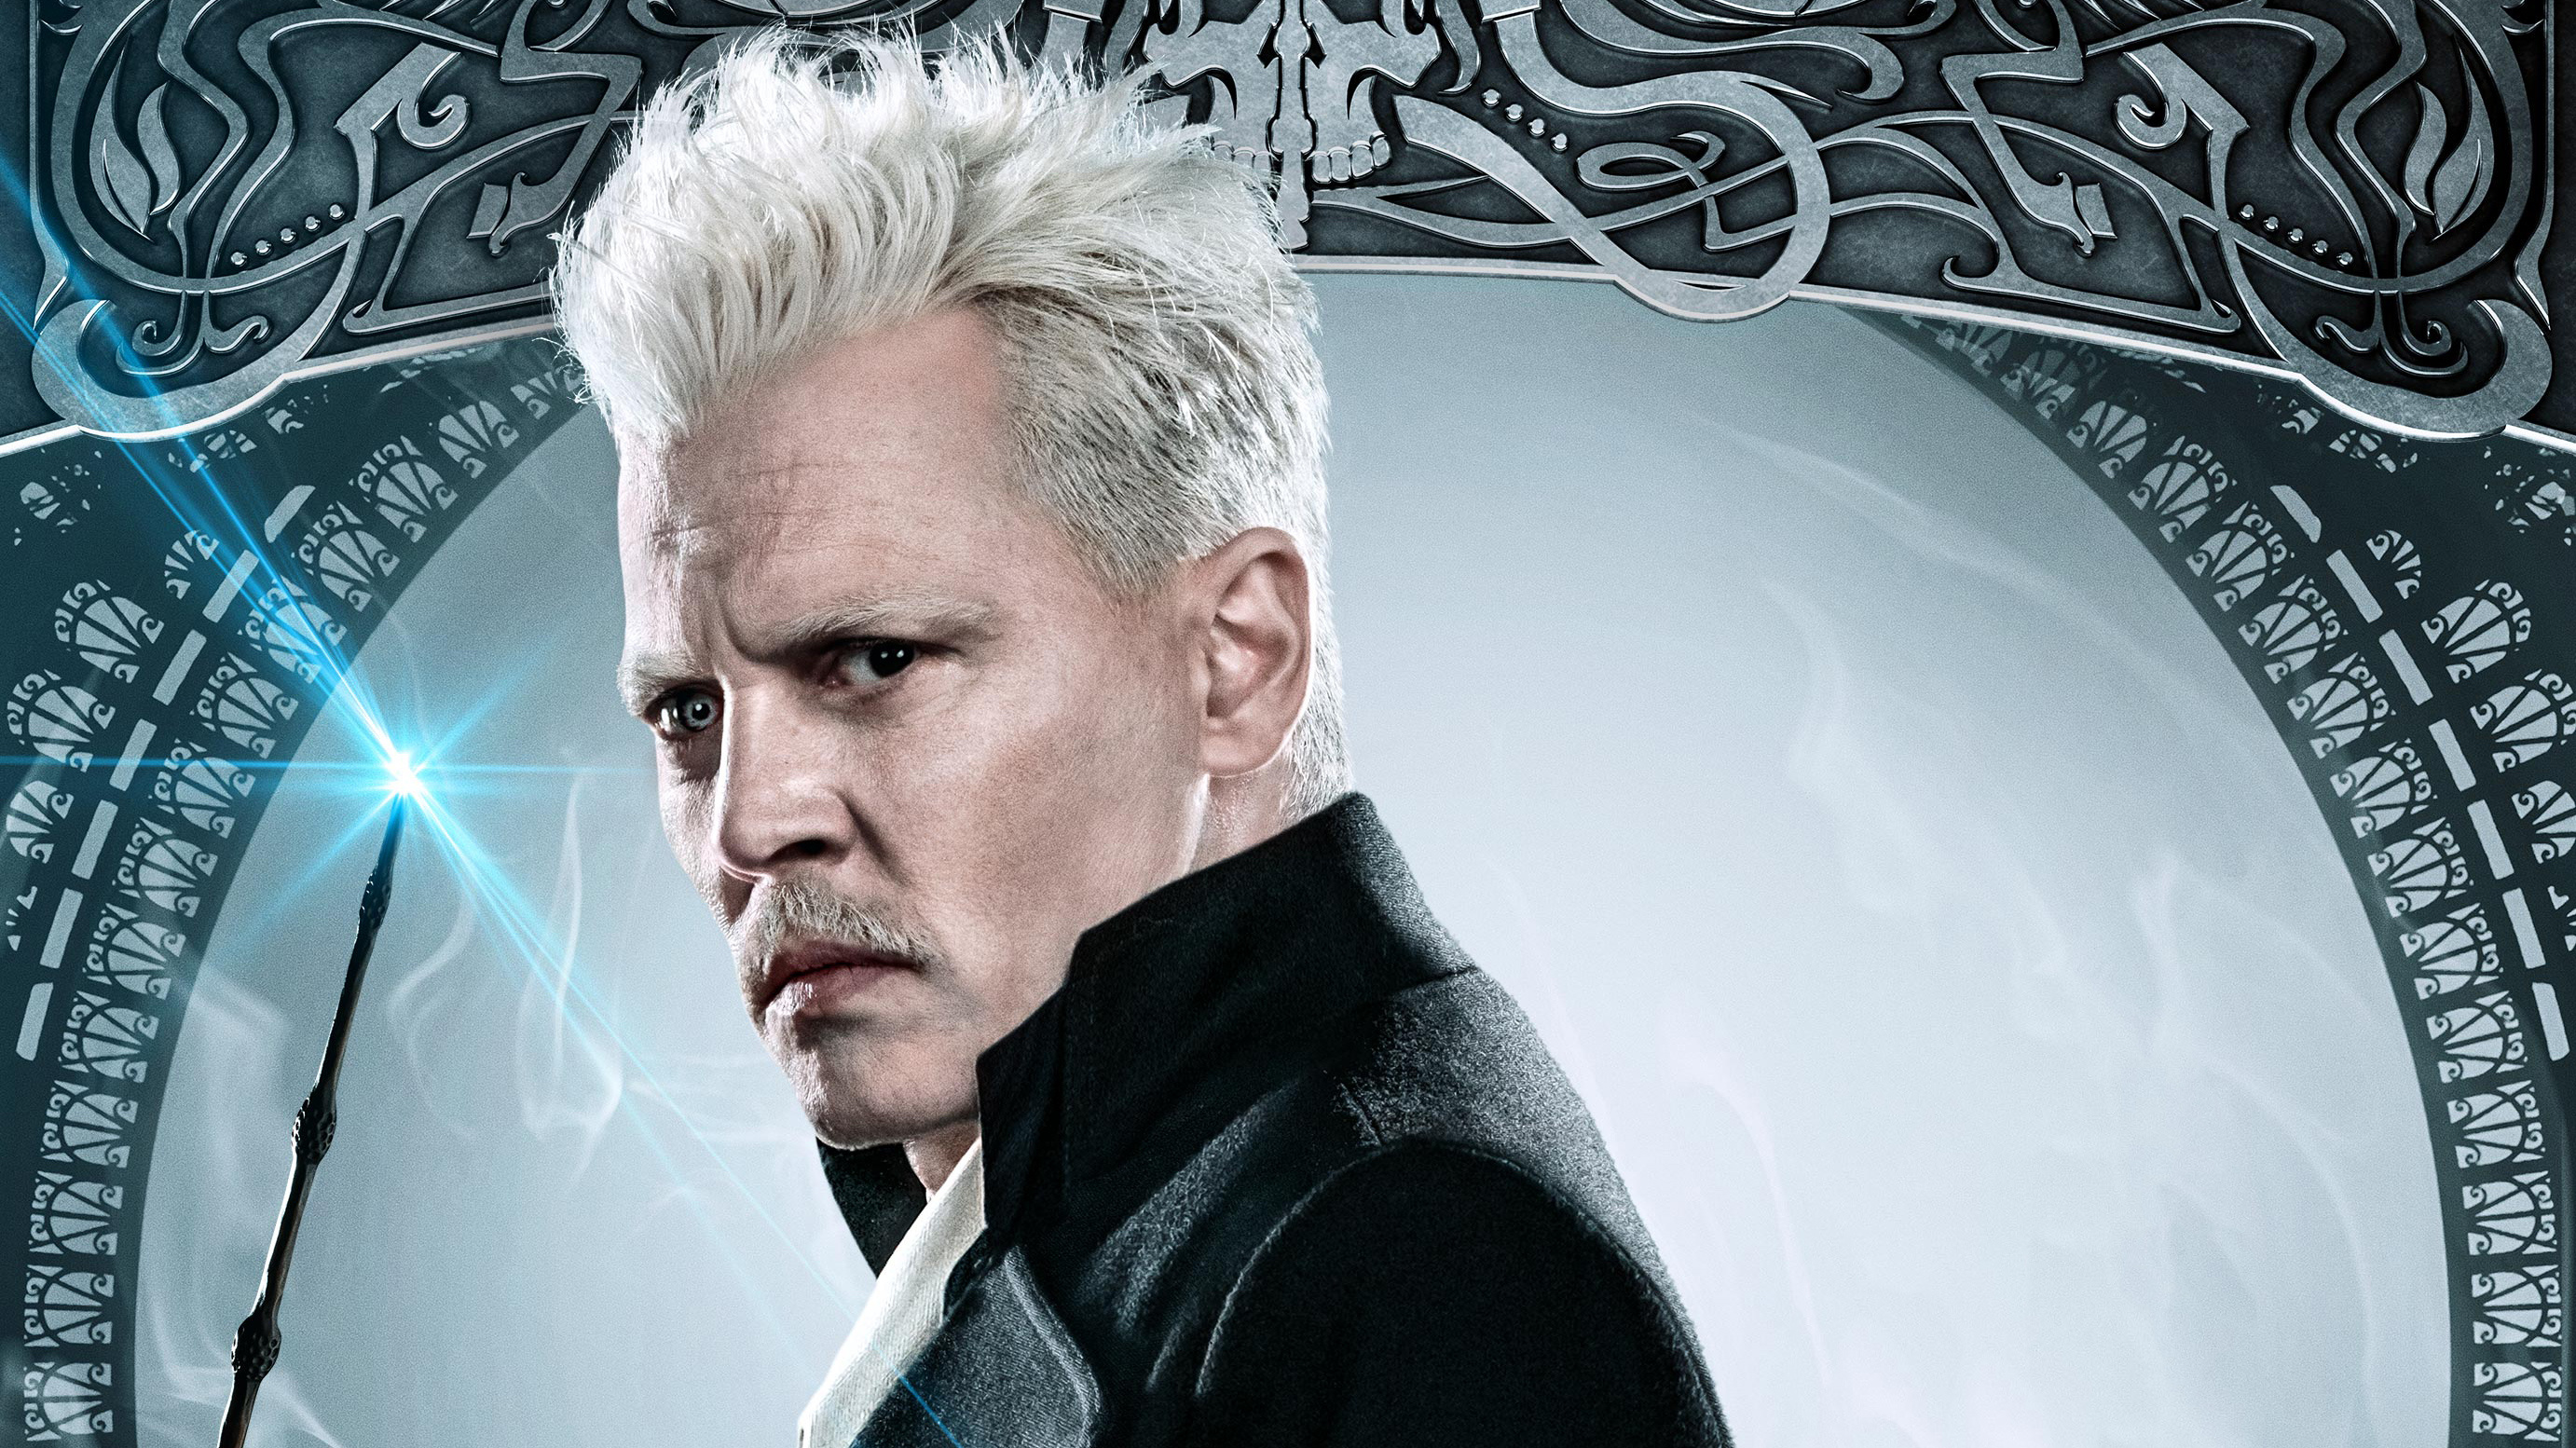 Johnny Depp: The role of an infamous, powerful dark wizard, Fantastic Beasts: The Crimes of Grindelwald. 2770x1560 HD Wallpaper.